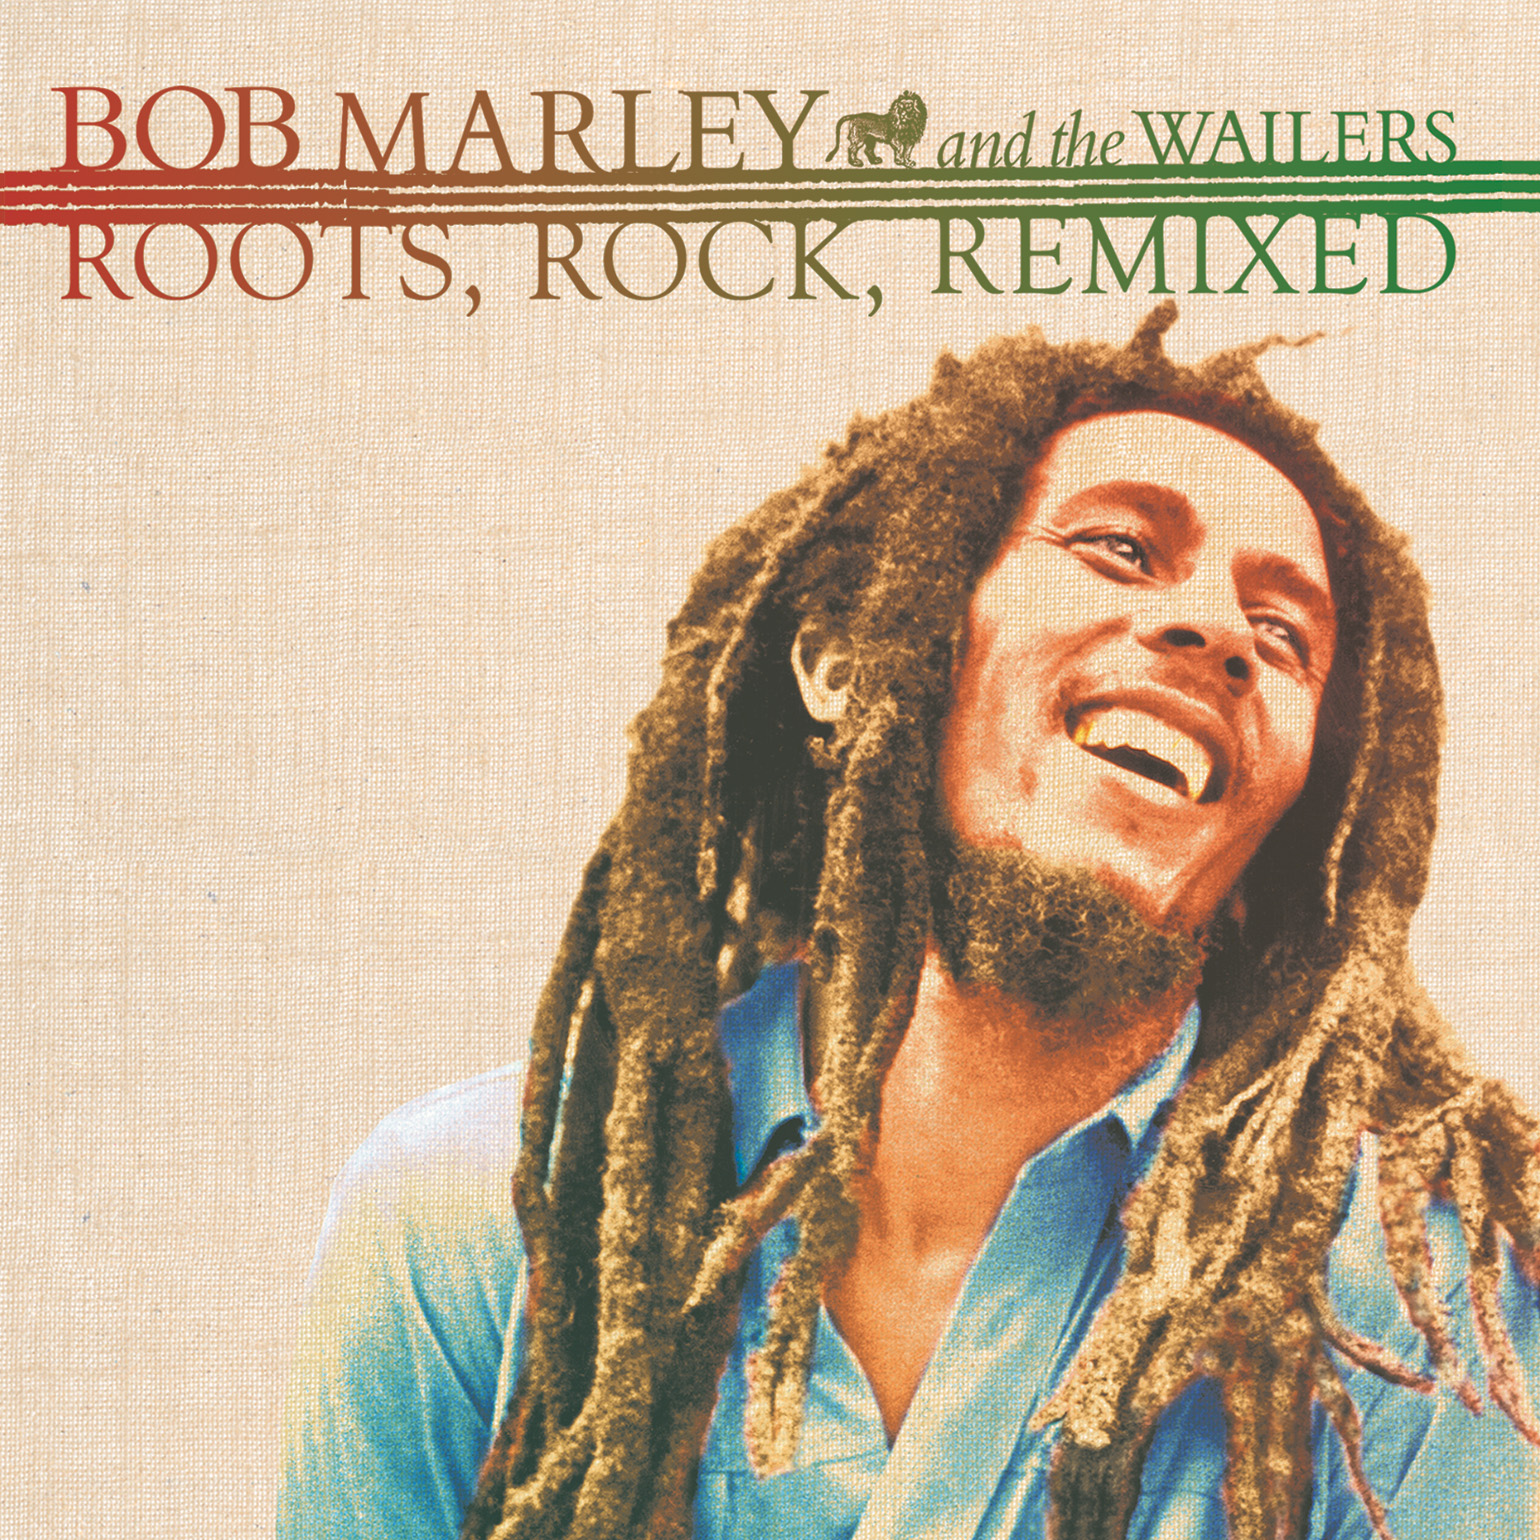 Roots, Rock, Remixed: The Complete Sessions by Bob Marley & The Wailers